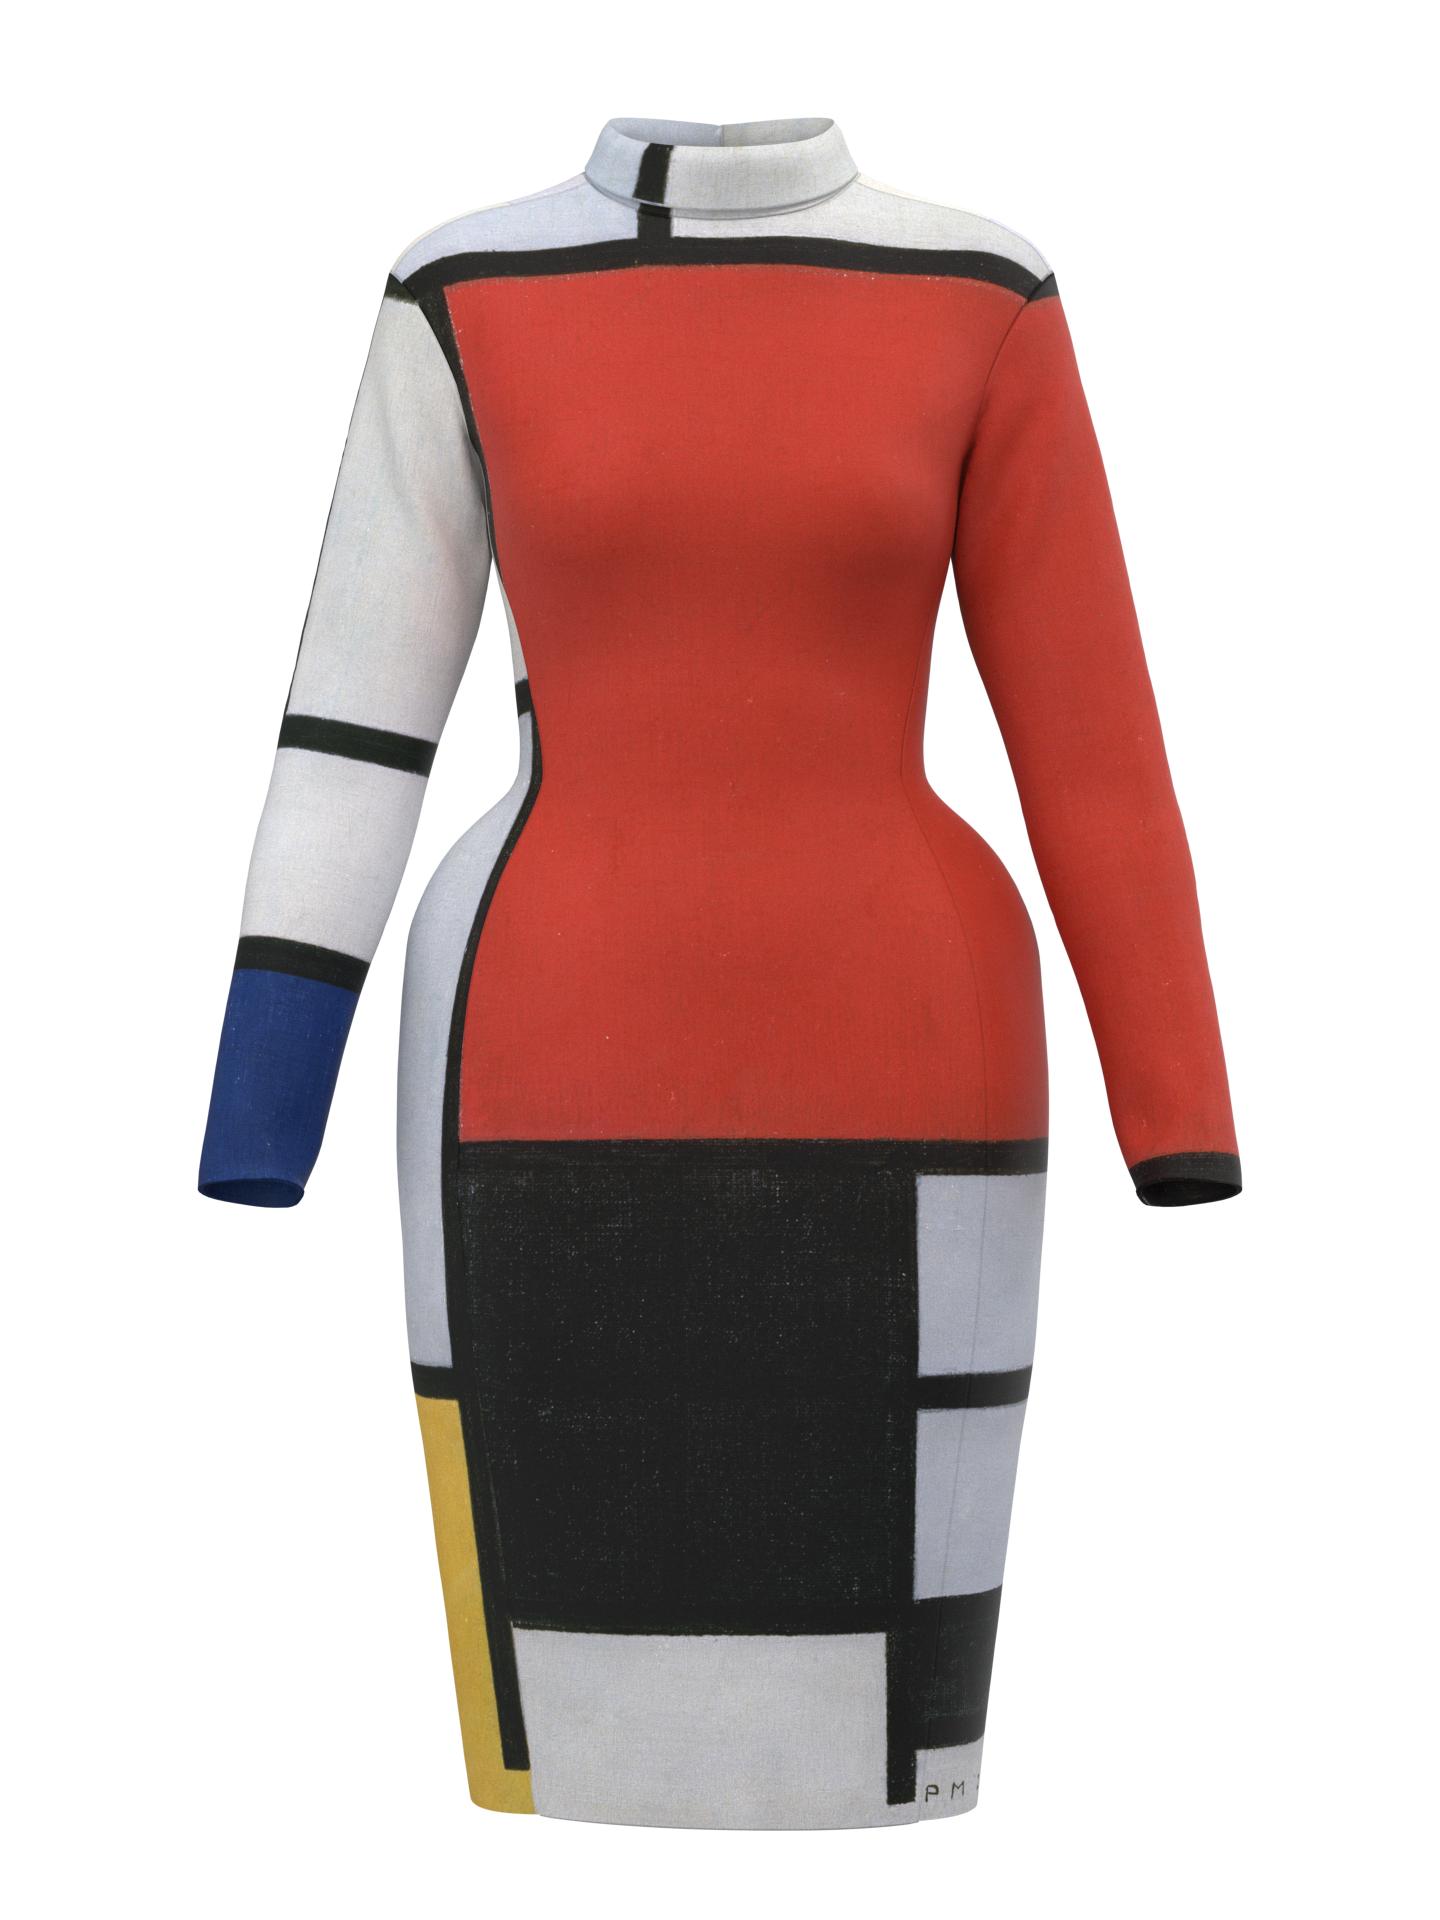 Space Dress-Composition with Red, Yellow, Blue and Black by DRESSX PIET MONDRIAN